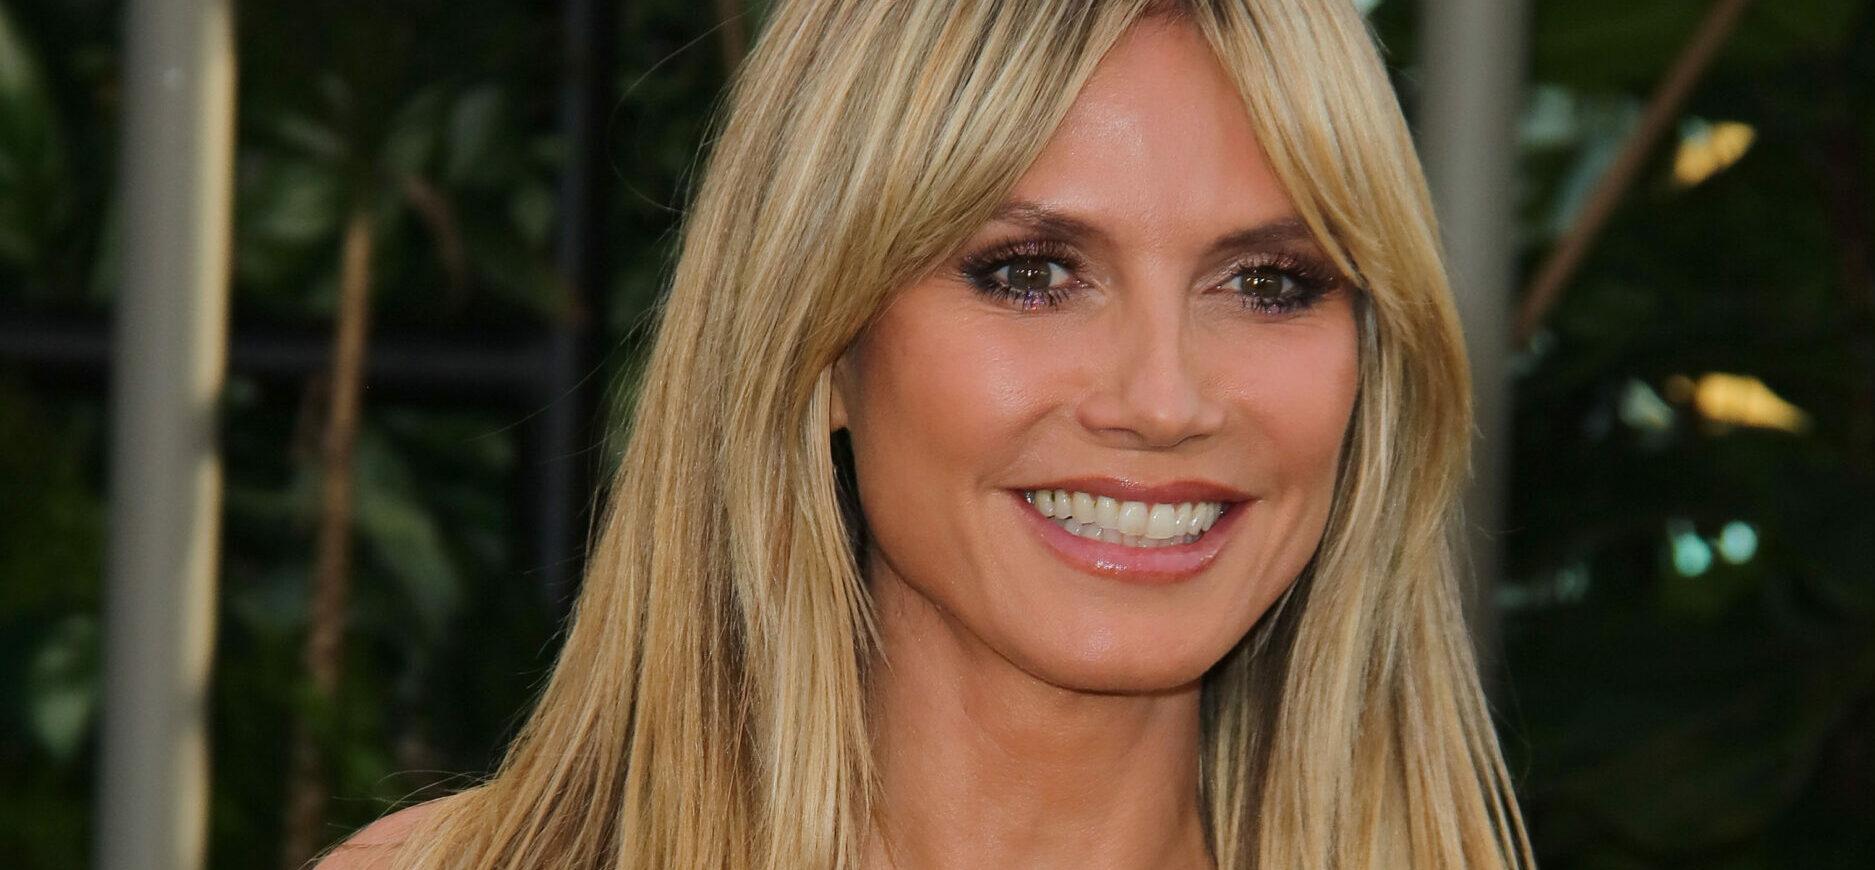 Heidi Klum In Revealing Swimsuit Says ‘Make Sure To Eat Your Fruits’